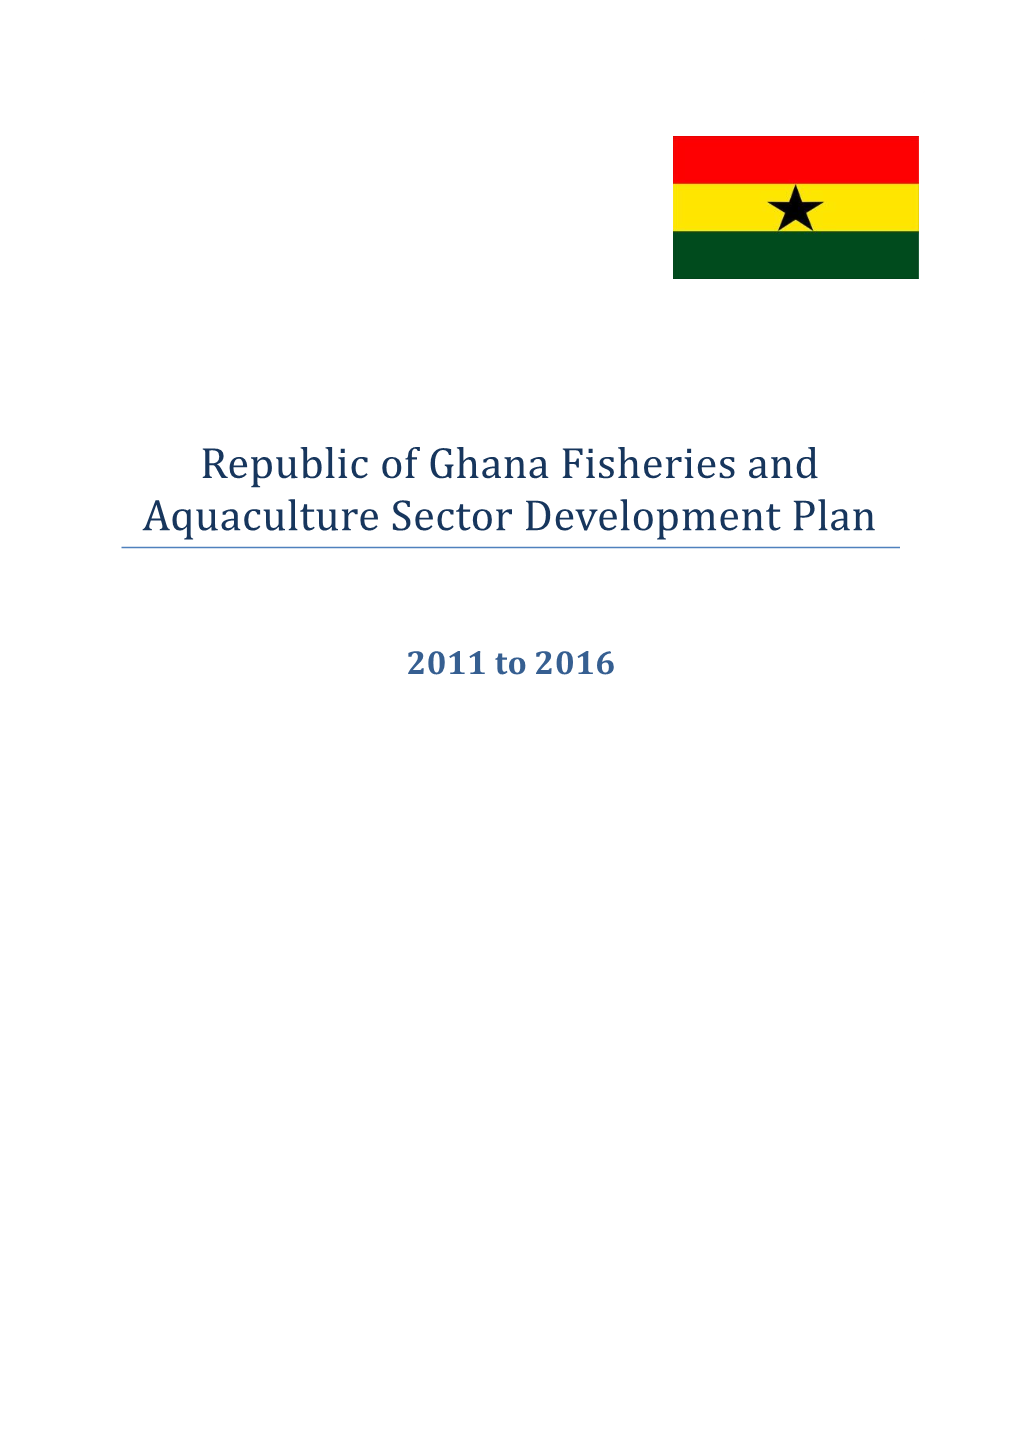 Republic of Ghana Fisheries and Aquaculture Sector Development Plan